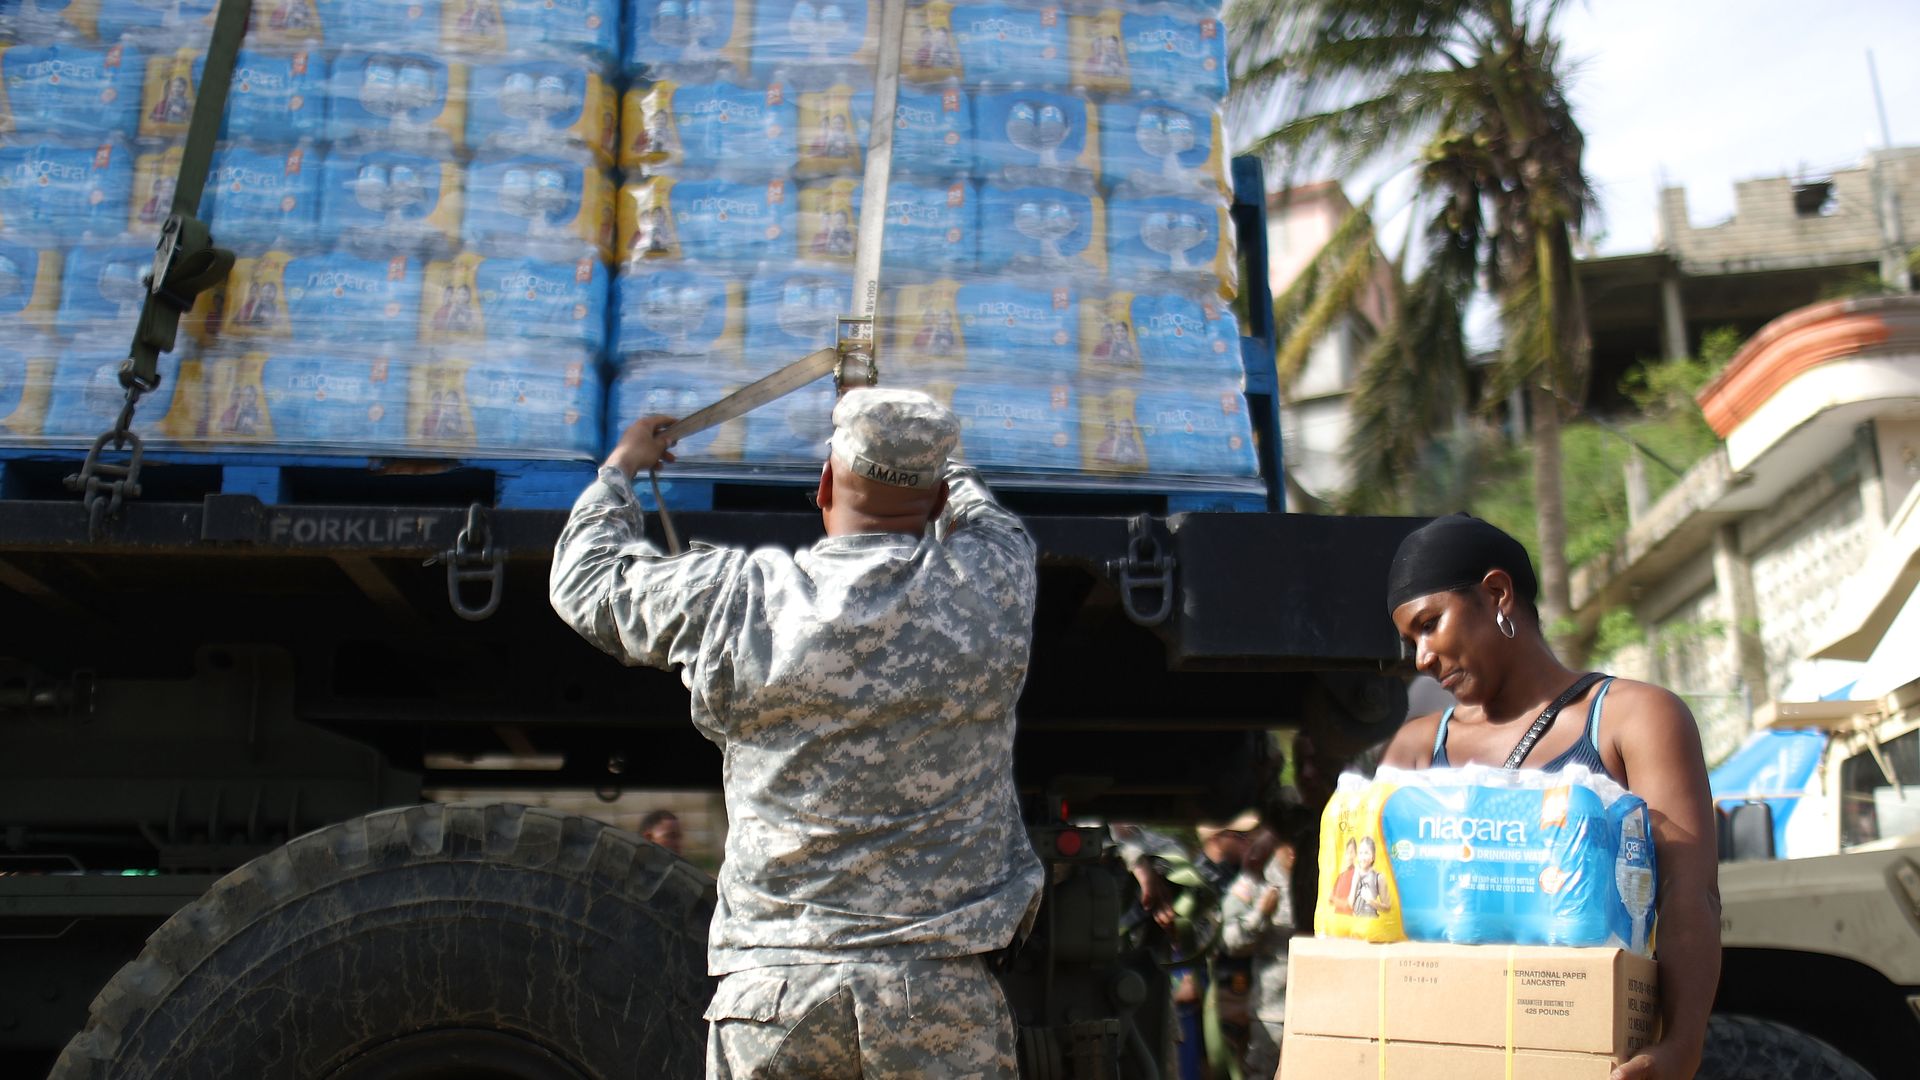 A U.S. Army soldier starts to unload a shipment of water, provided by FEMA on October 17, 2017 in San Isidro, Puerto Rico.